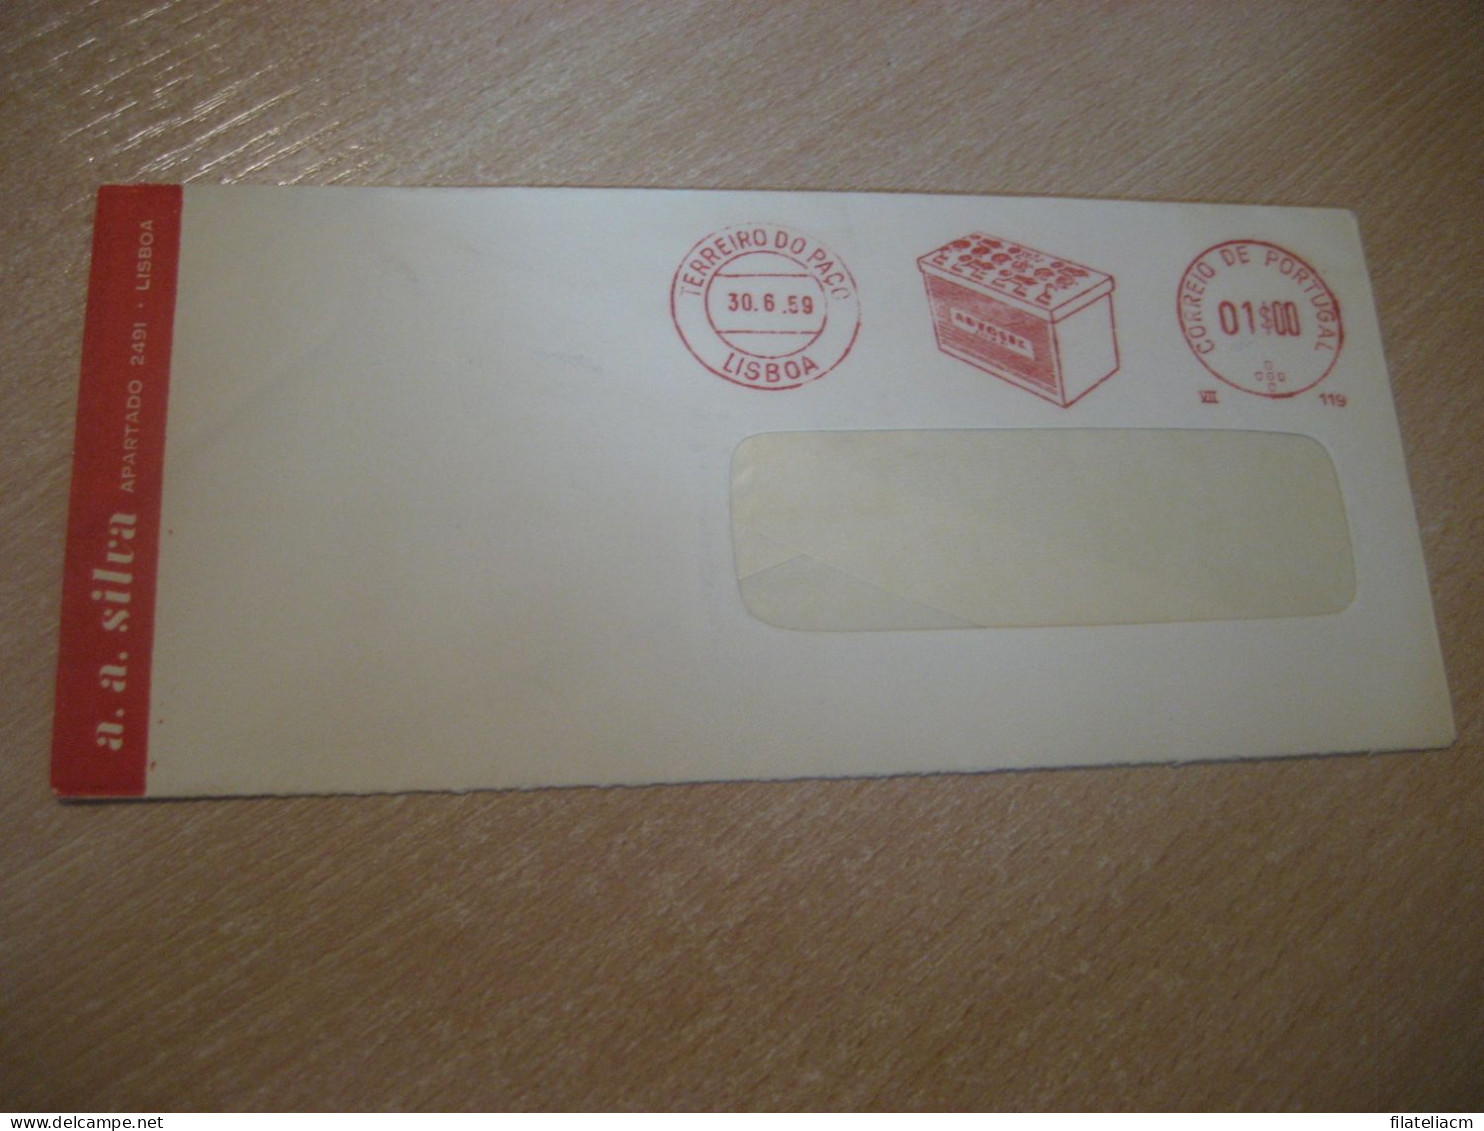 LISBOA 1959 Autosol Battery Car Meter Mail Cancel Cover PORTUGAL - Covers & Documents